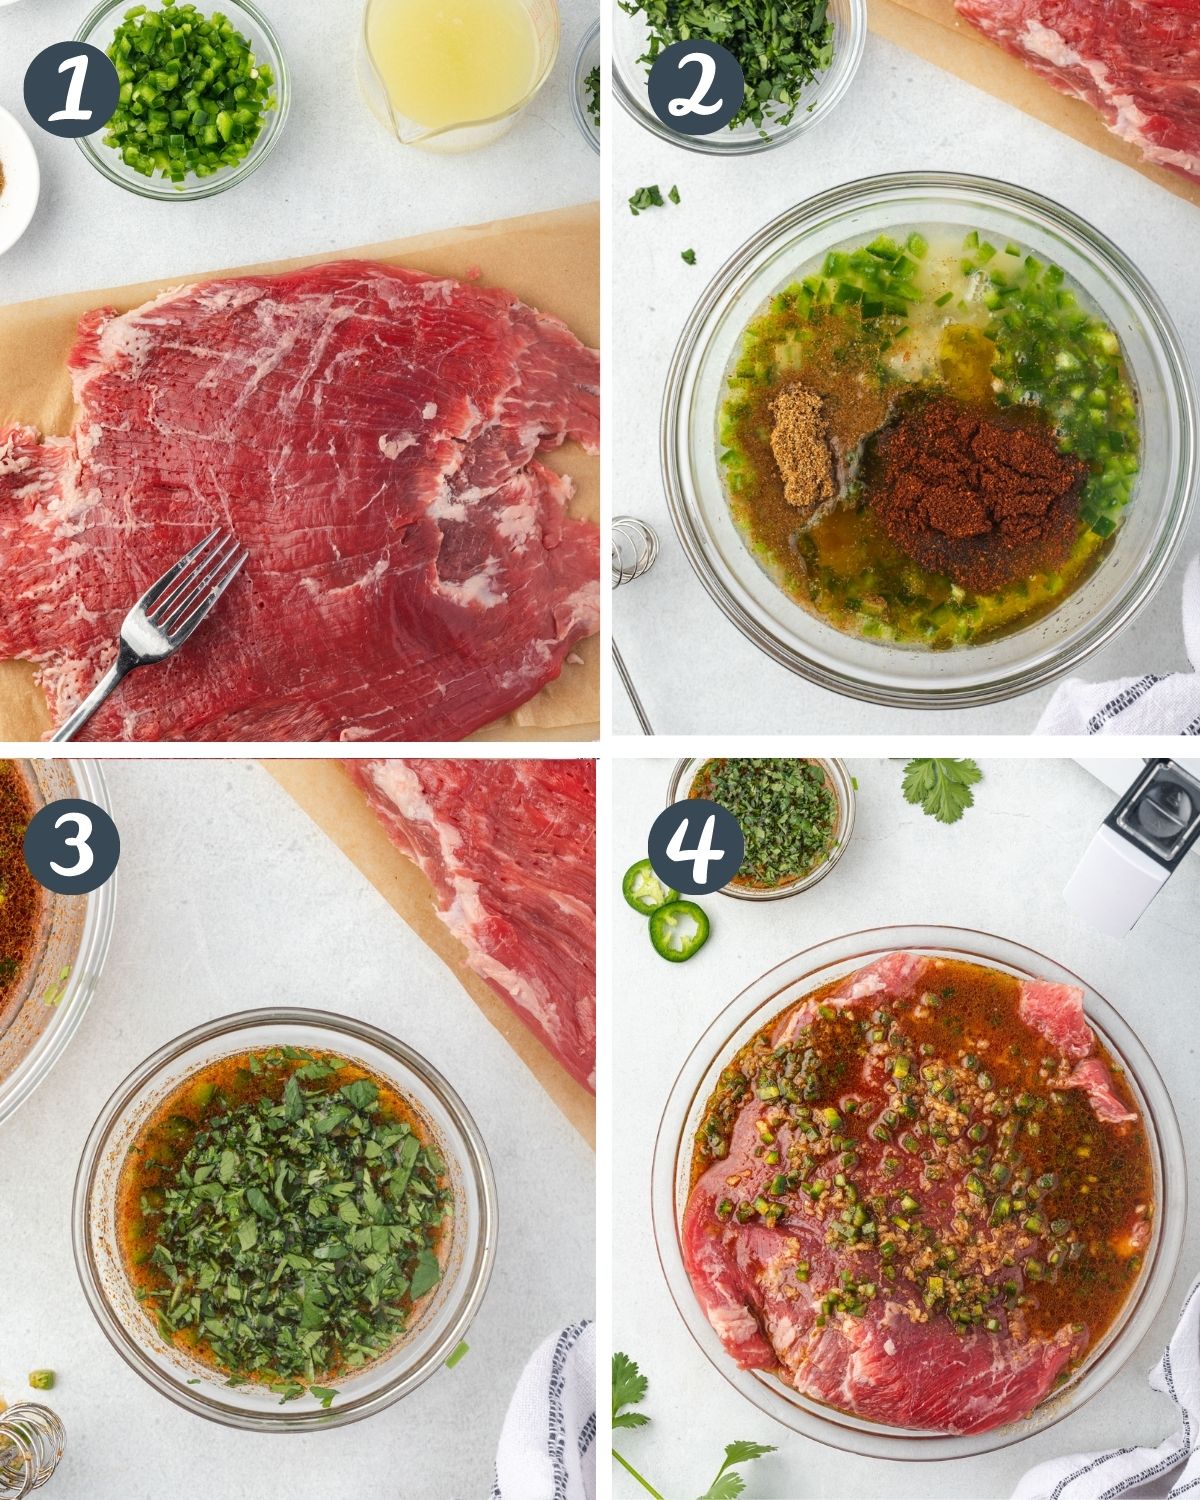 Collage of cooking steps: Piercing meat with fork, marinade in bowl, cilantro in reserved marinade, and marinade poured over raw meat.